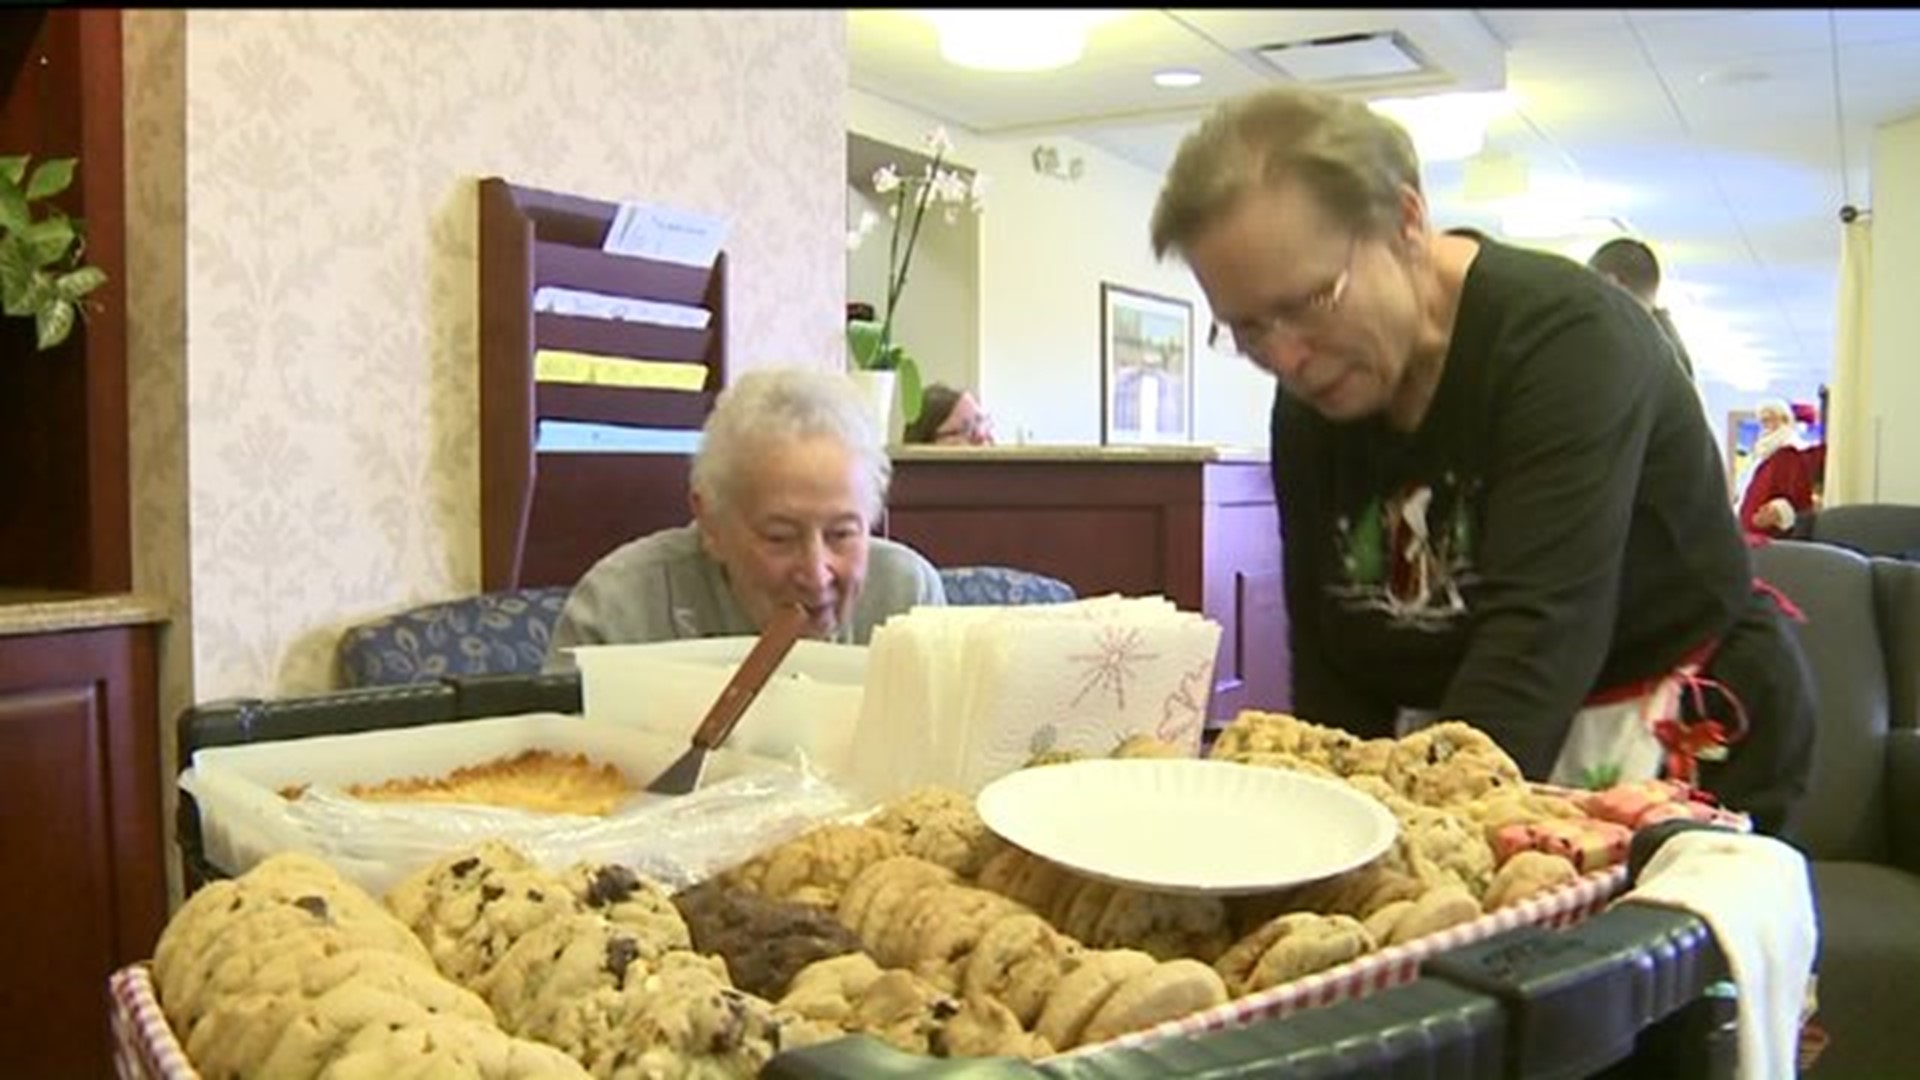 Pay It Forward: The Caring "Cookie Lady"